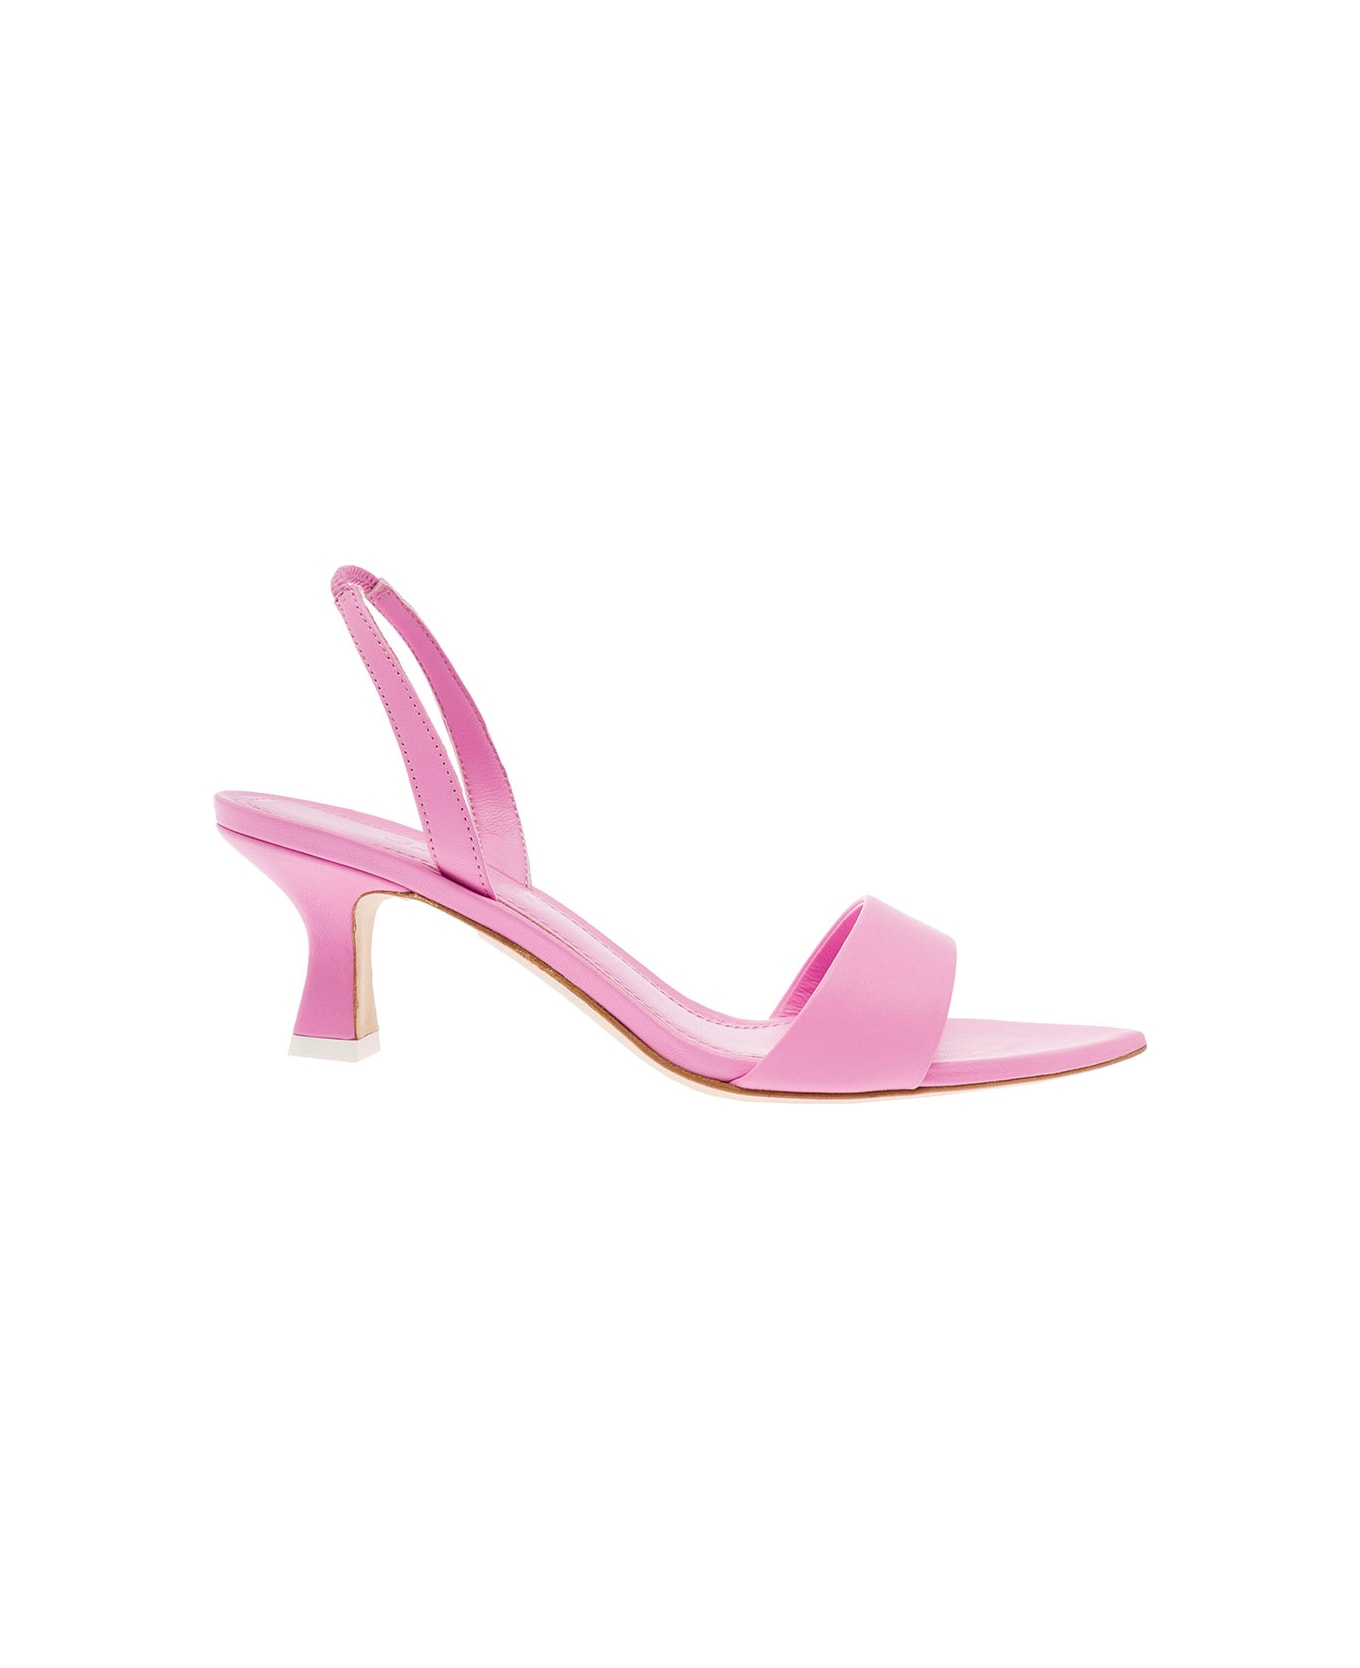 3JUIN 'eloise' Pink Andals With Rhinestone Embellishment And Spool Hight Heel In Viscose Blend Woman - Pink